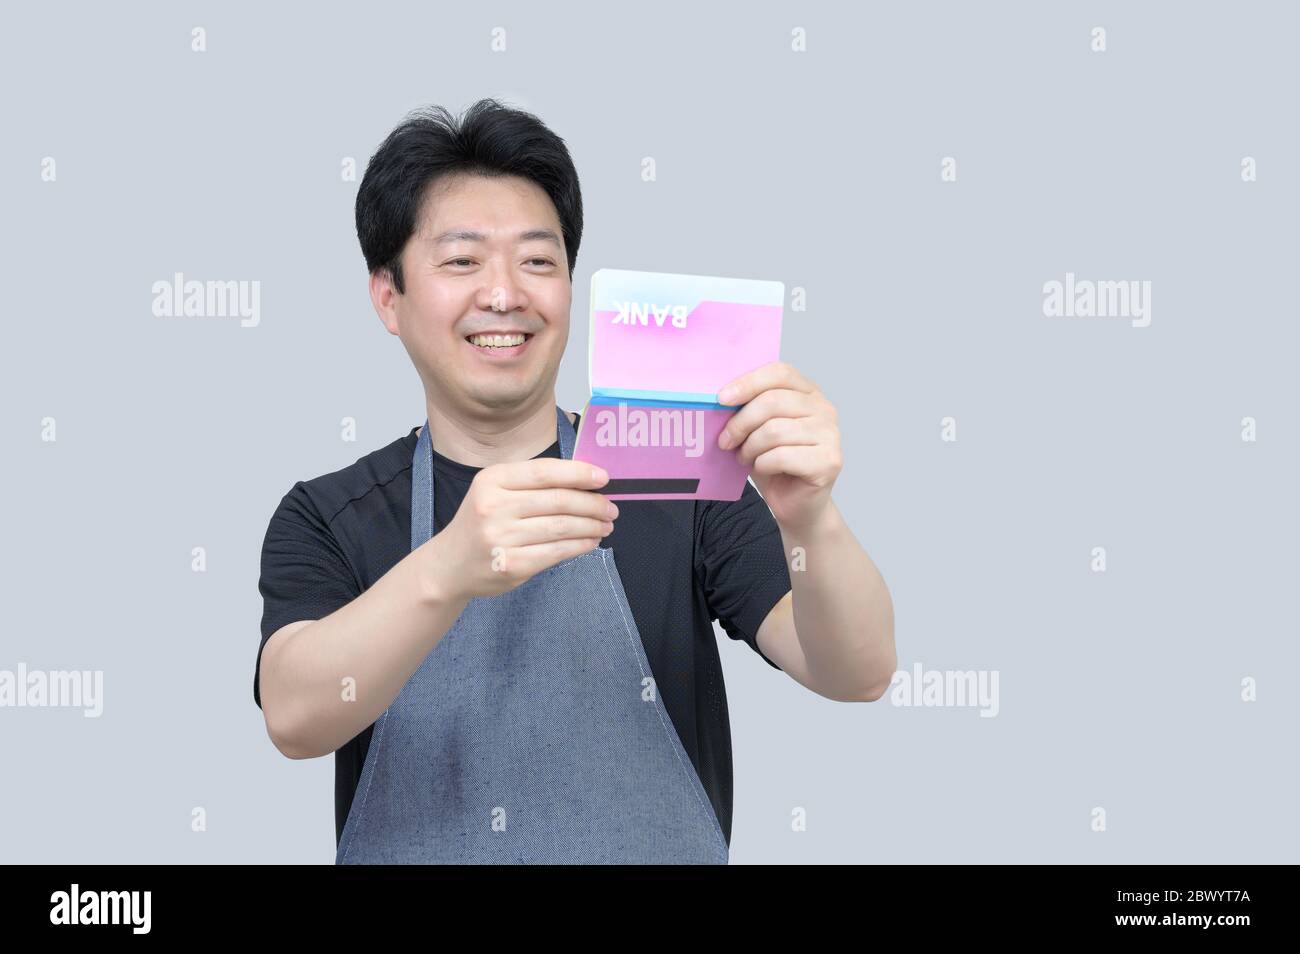 A middle-aged Asian man holding a bank passbook in his hand on a gray background. Stock Photo